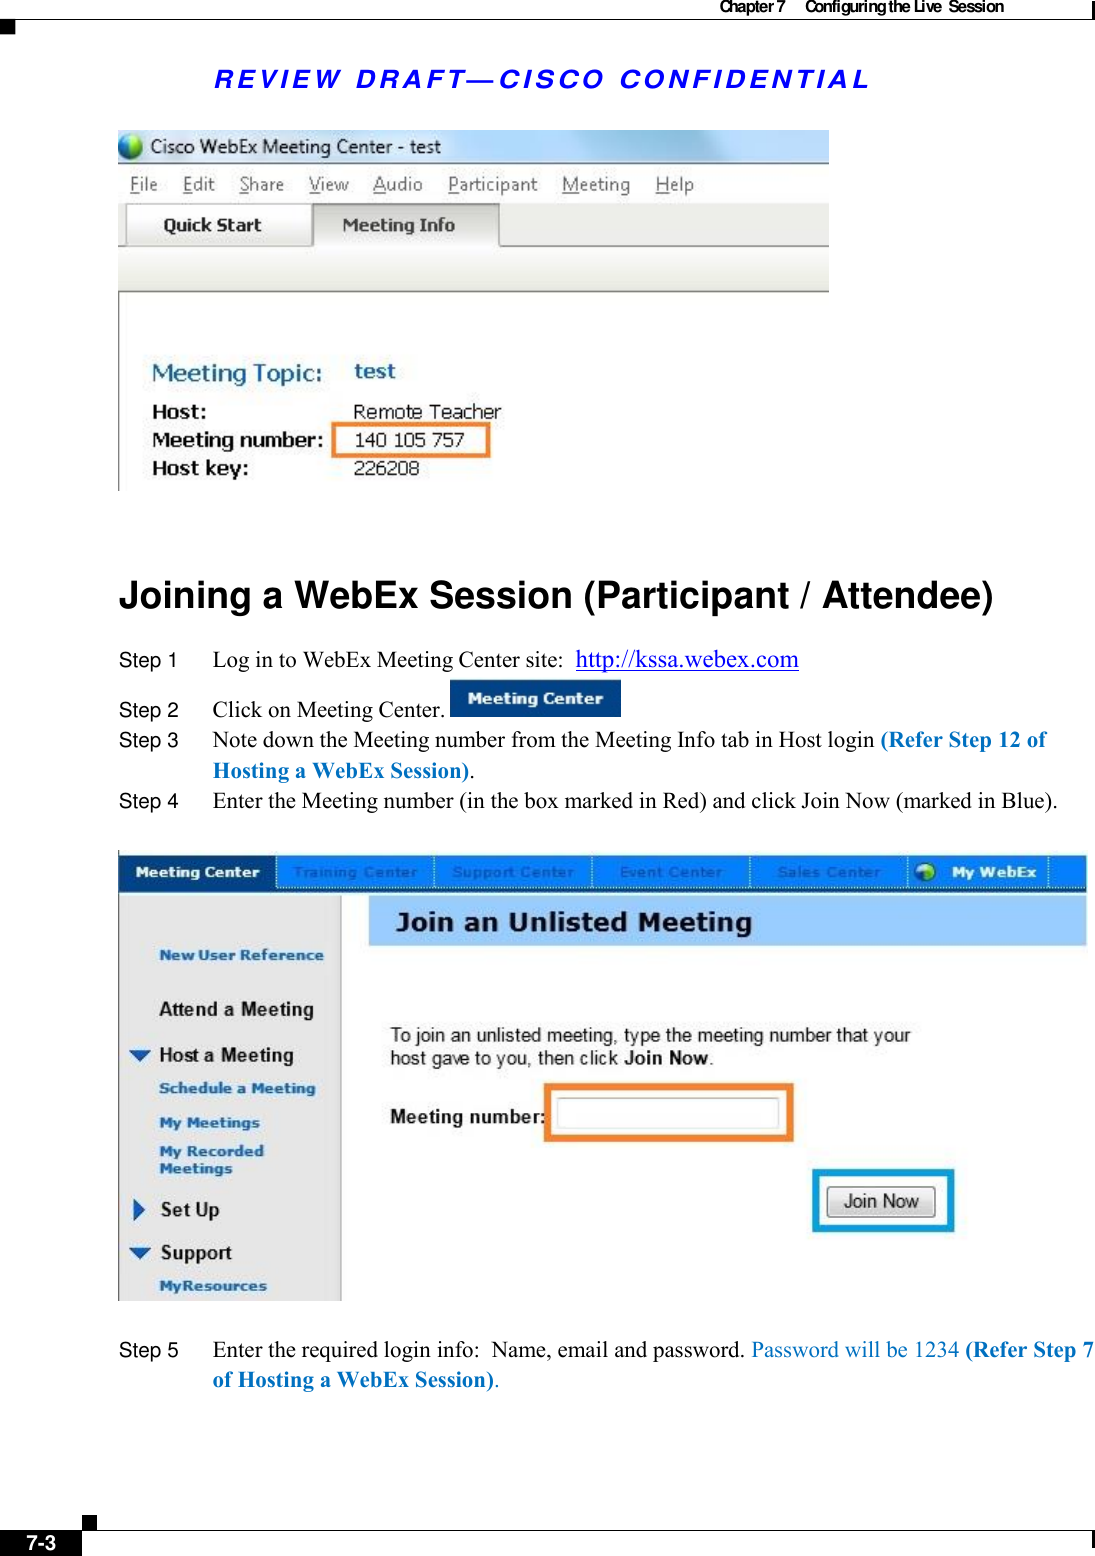 Chapter 7  Configuring the Live  Session   R E V IE W  DRAFT— CISC O  C O NF IDENTIA L    Joining a WebEx Session (Participant / Attendee) Step 1  Log in to WebEx Meeting Center site:  http://kssa.webex.com Step 2  Click on Meeting Center.       Step 3  Note down the Meeting number from the Meeting Info tab in Host login (Refer Step 12 of Hosting a WebEx Session). Step 4  Enter the Meeting number (in the box marked in Red) and click Join Now (marked in Blue).    Step 5  Enter the required login info:  Name, email and password. Password will be 1234 (Refer Step 7 of Hosting a WebEx Session).       7-3   